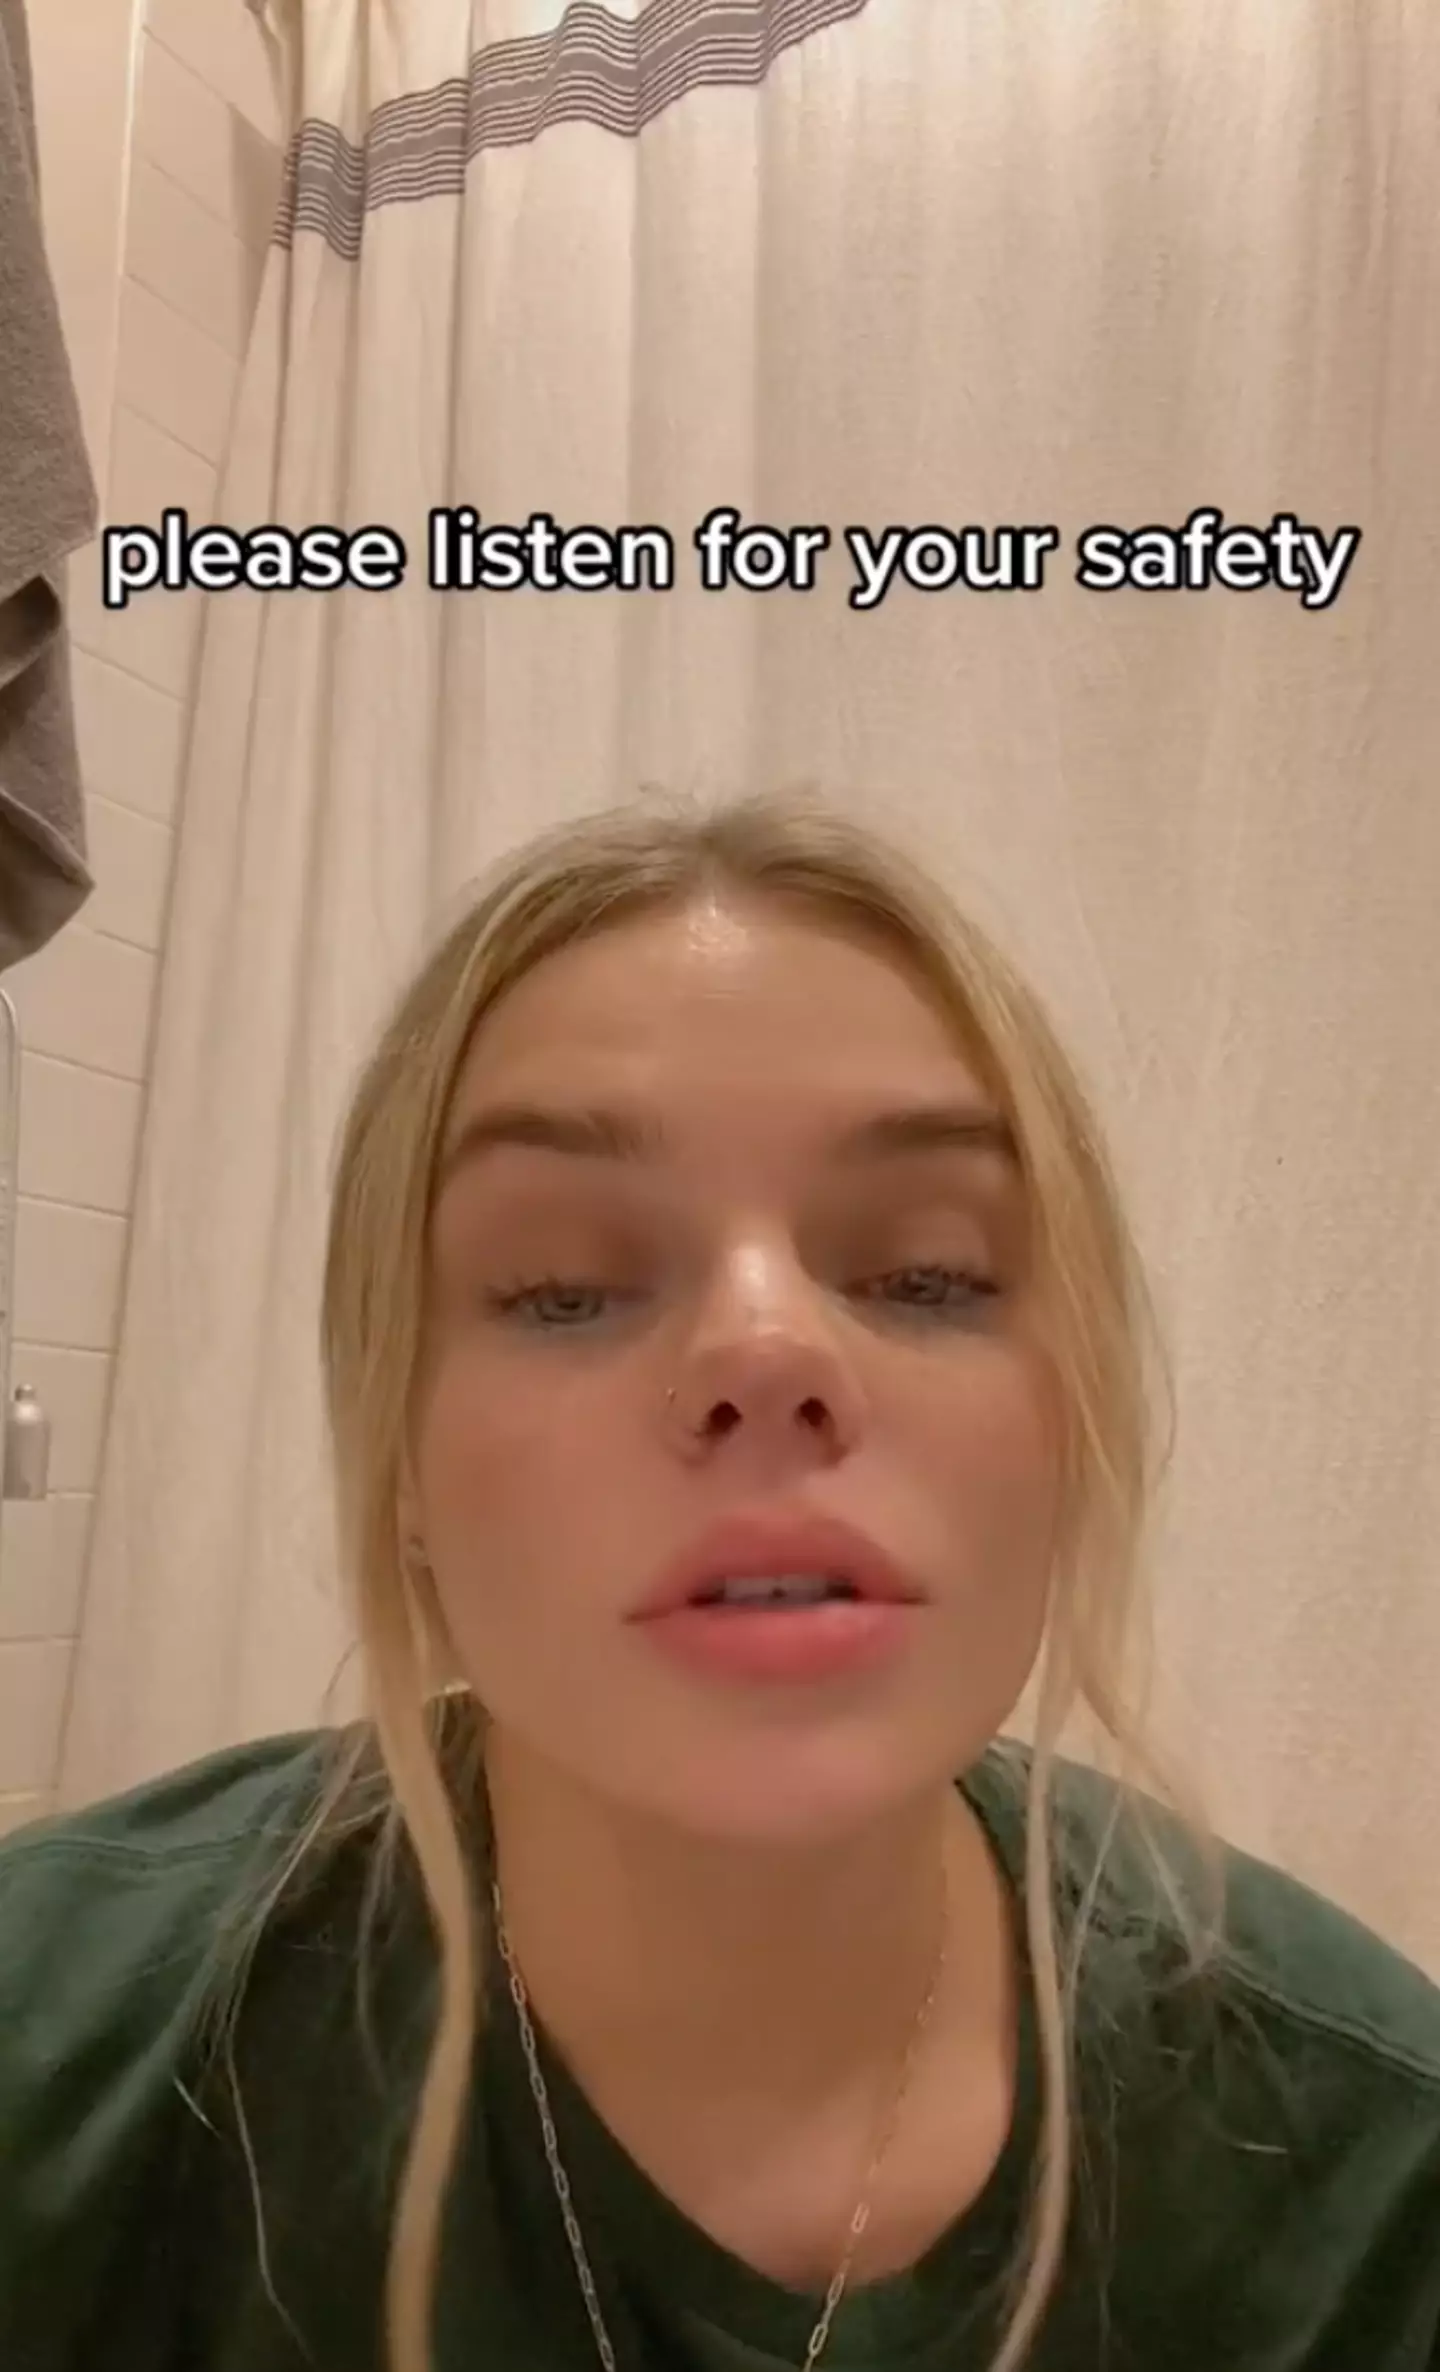 She urged people to listen for their safety.